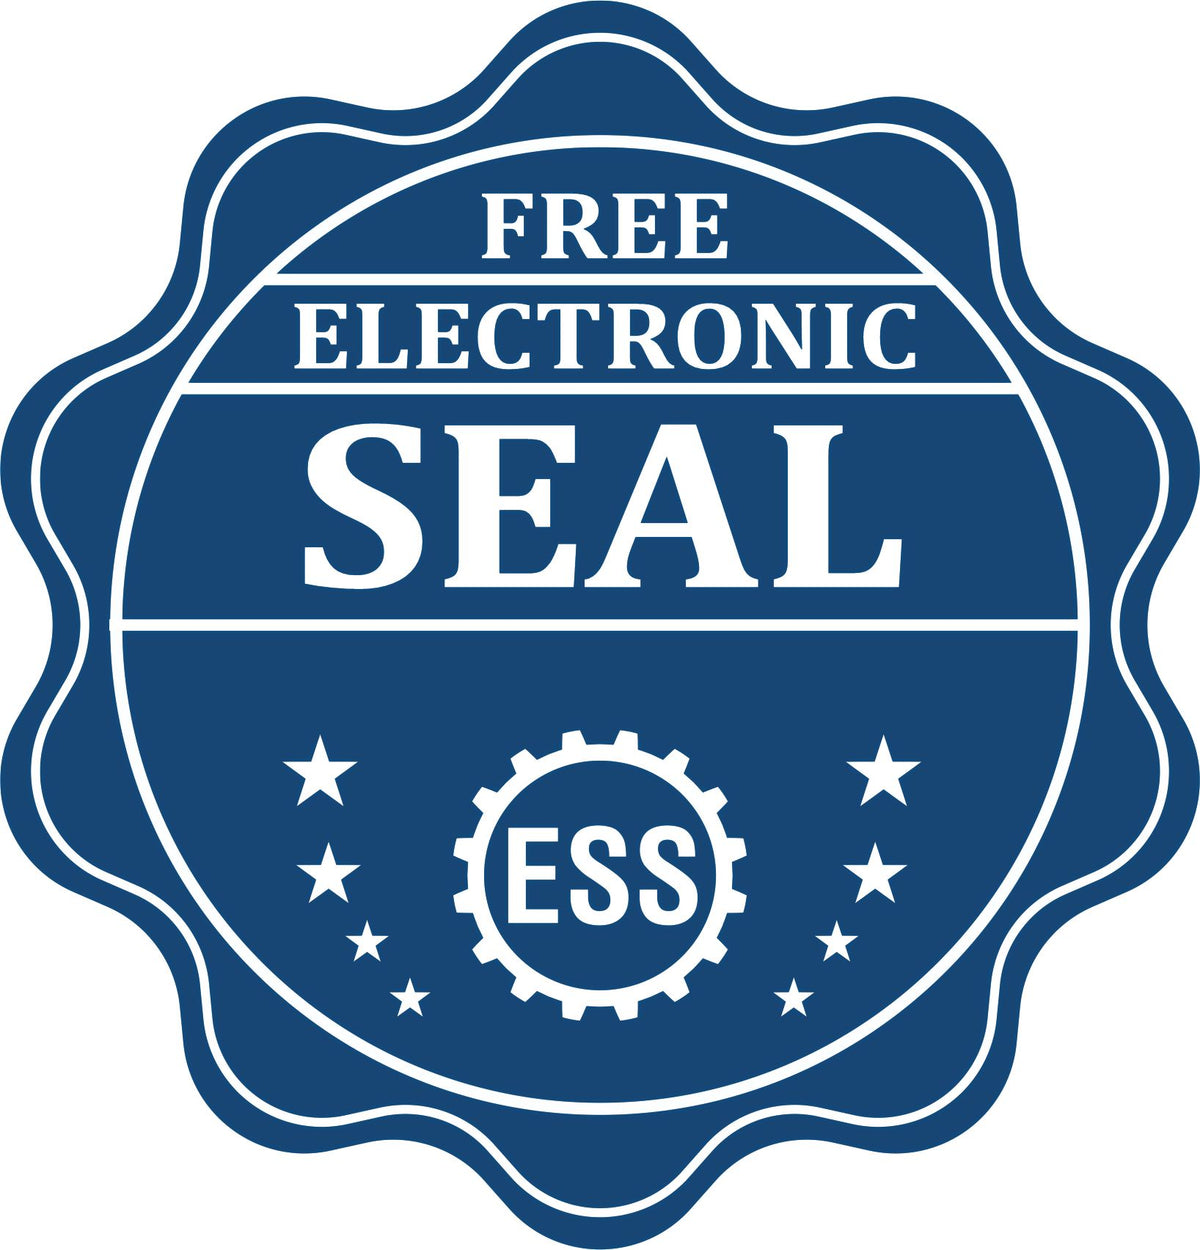 A badge showing a free electronic seal for the Heavy-Duty Delaware Rectangular Notary Stamp with stars and the ESS gear on the emblem.